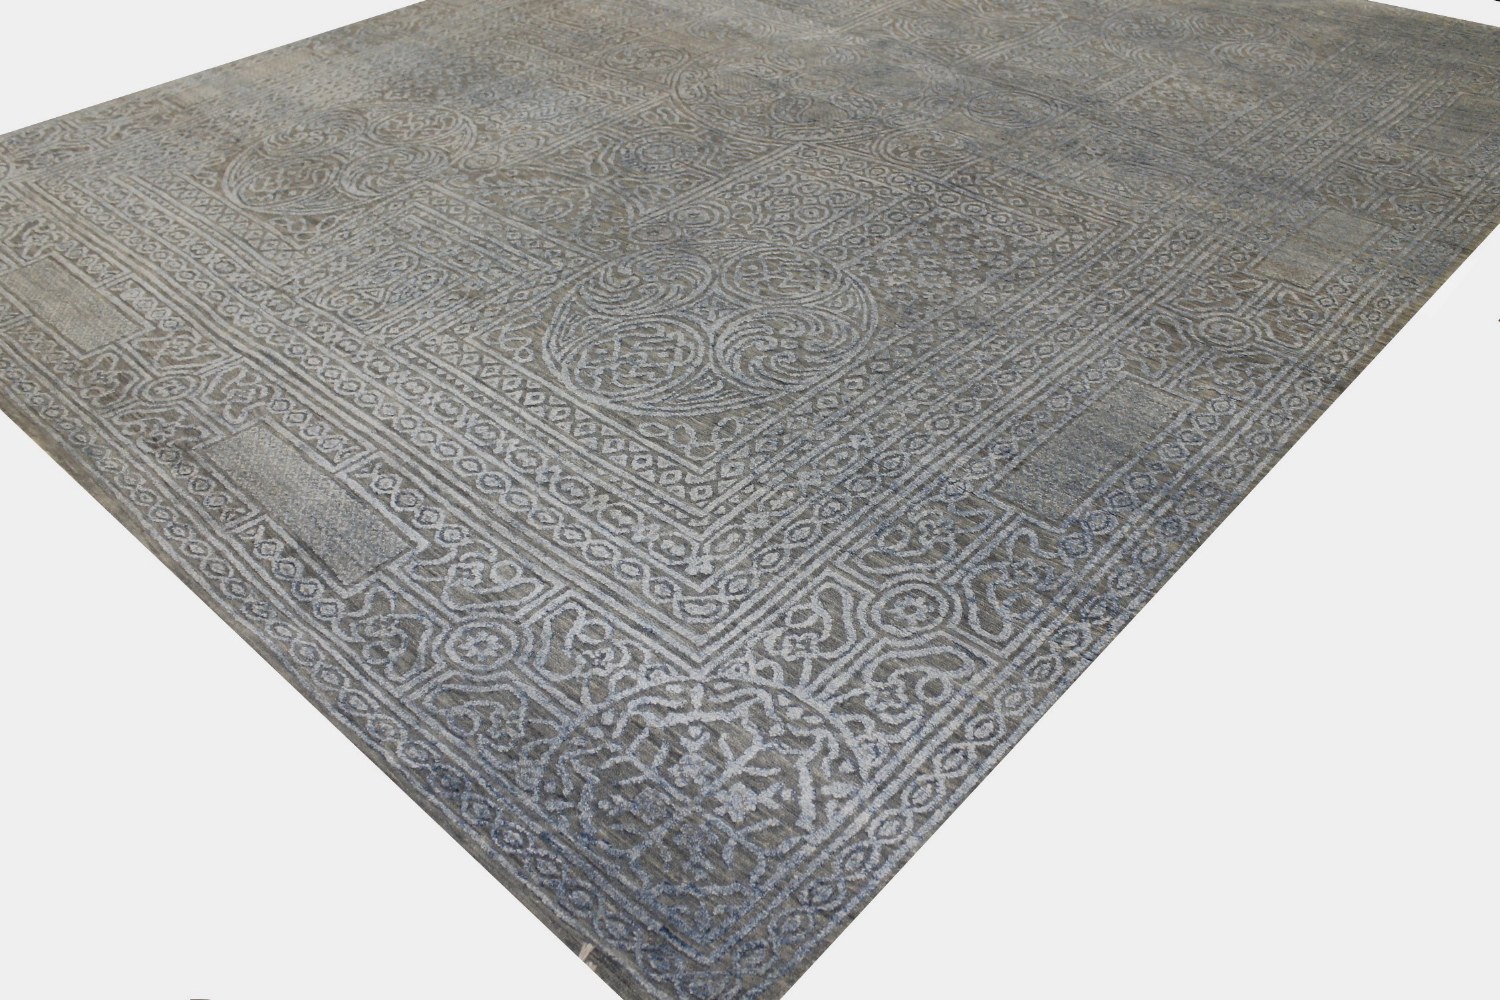 8x10 Transitional Hand Knotted Wool & Viscose Area Rug - MR022708